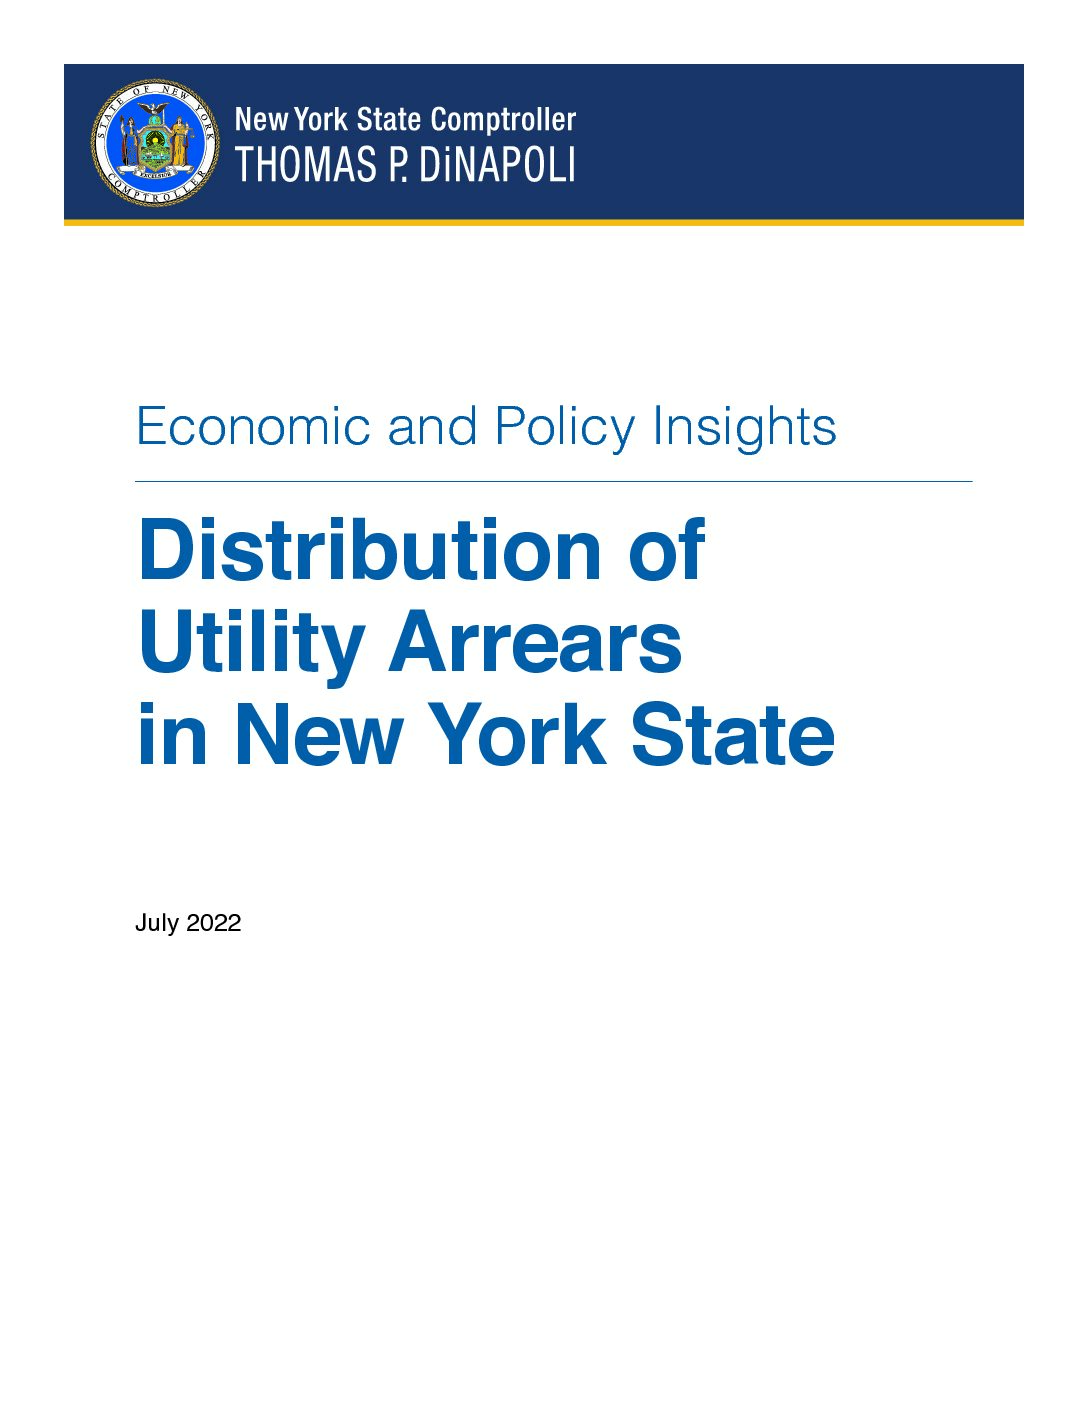 distribution-of-utility-arrears-in-nys